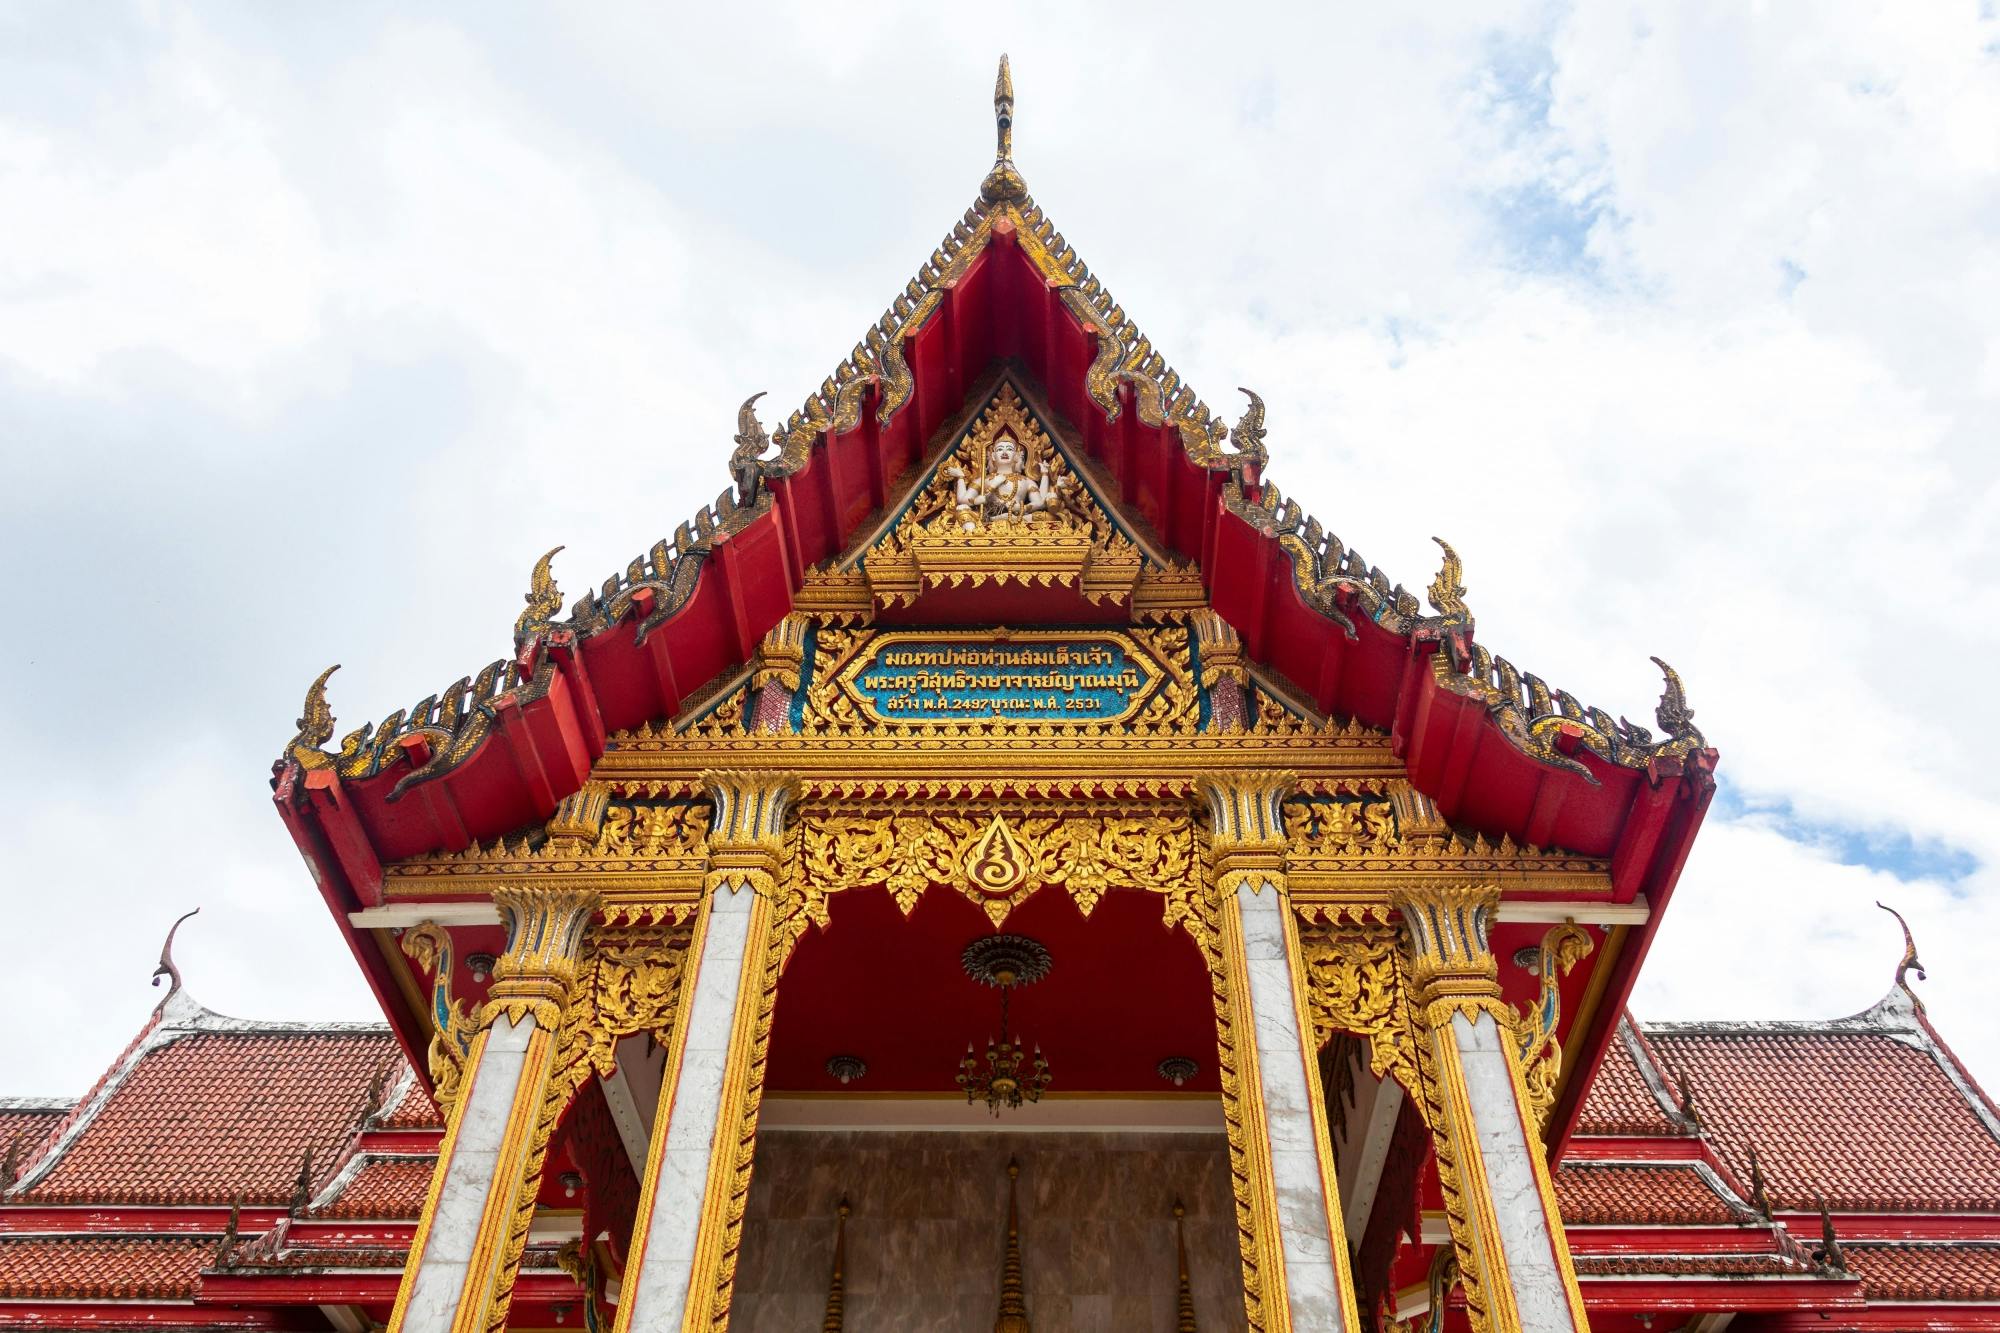 Phuket Island Tour with Temples